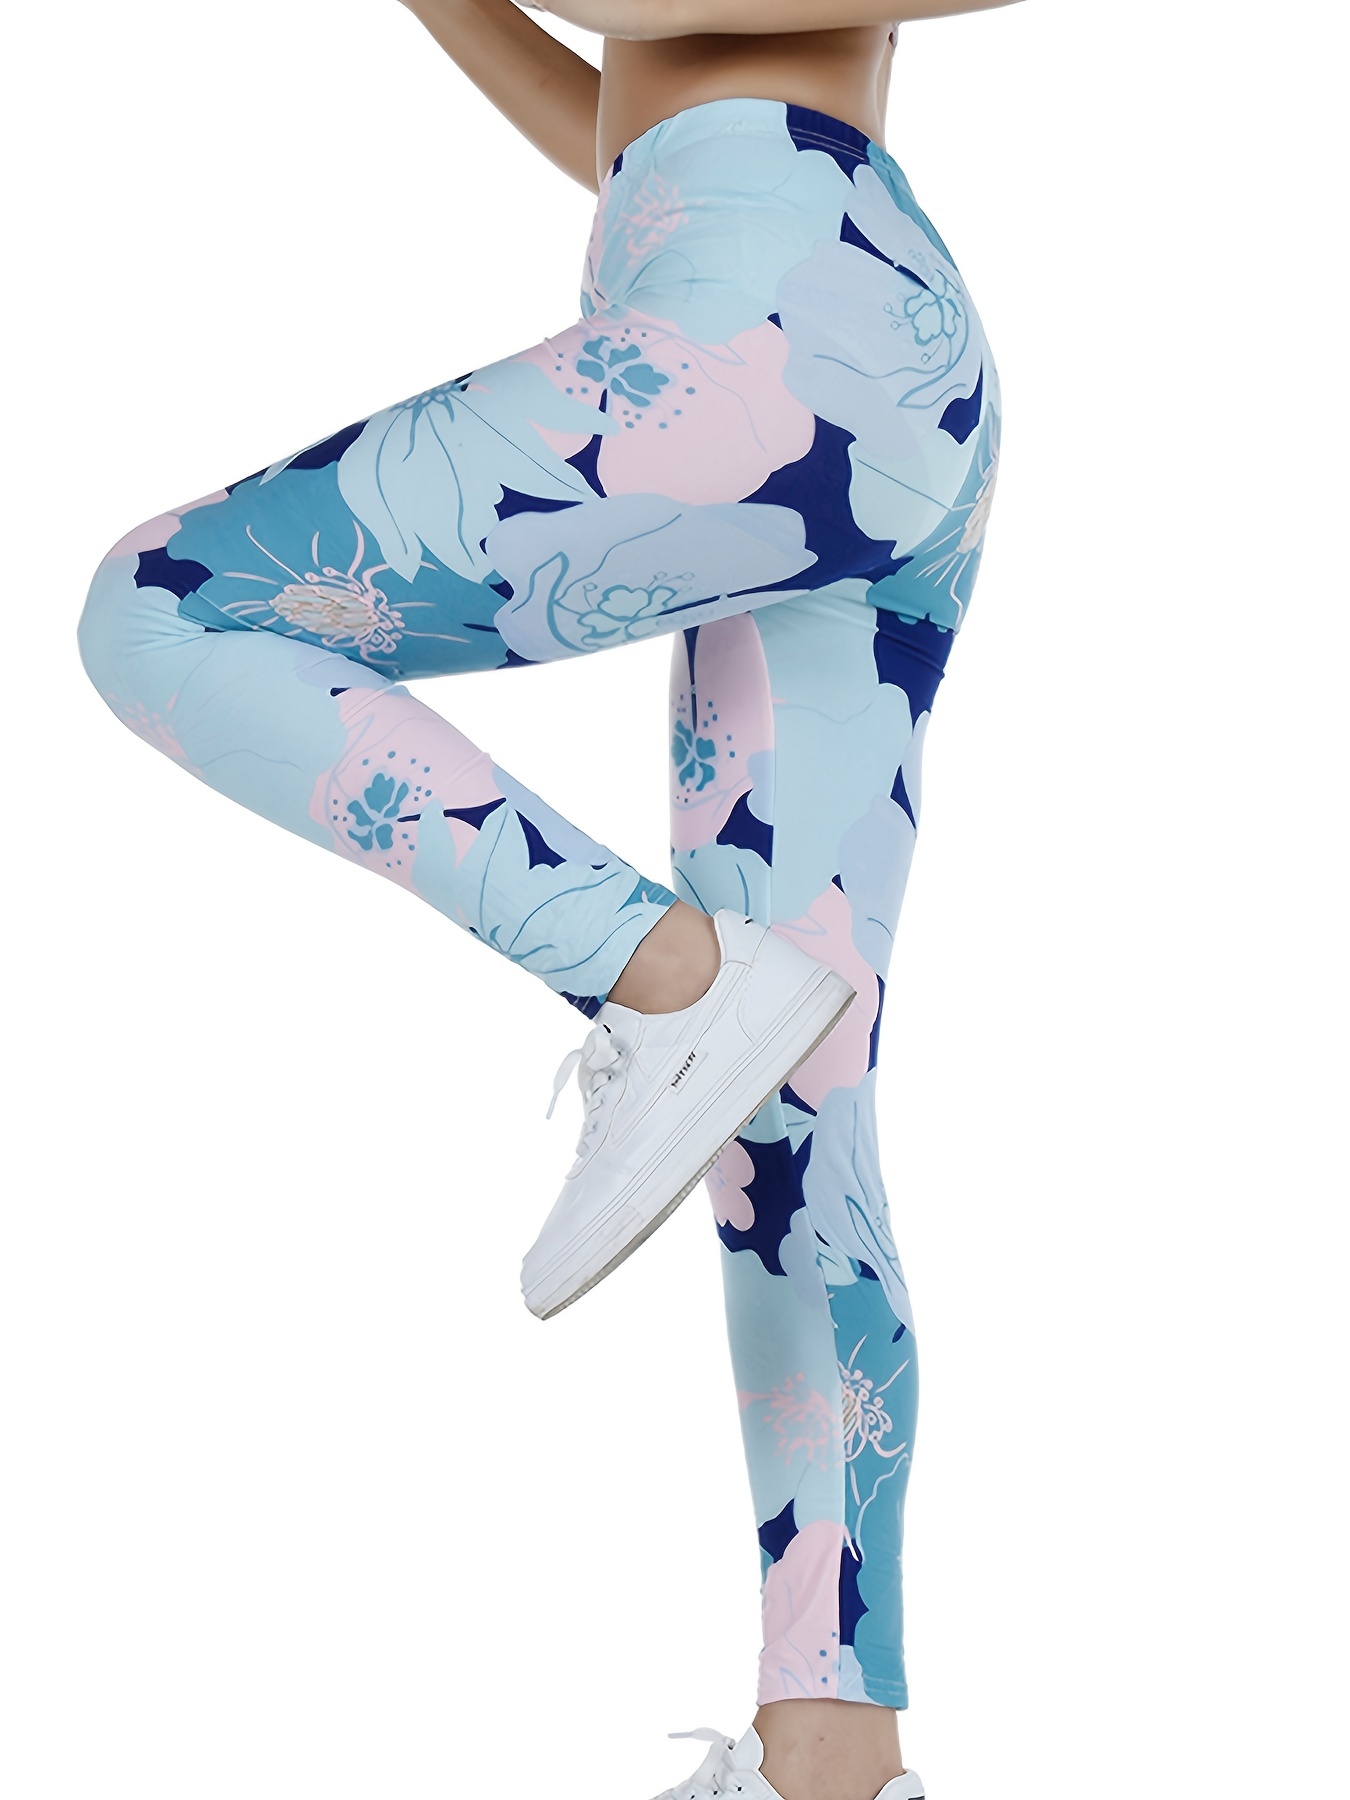 CUHAKCI Floral Sexy Pants Printed Legging Women Love Fitness